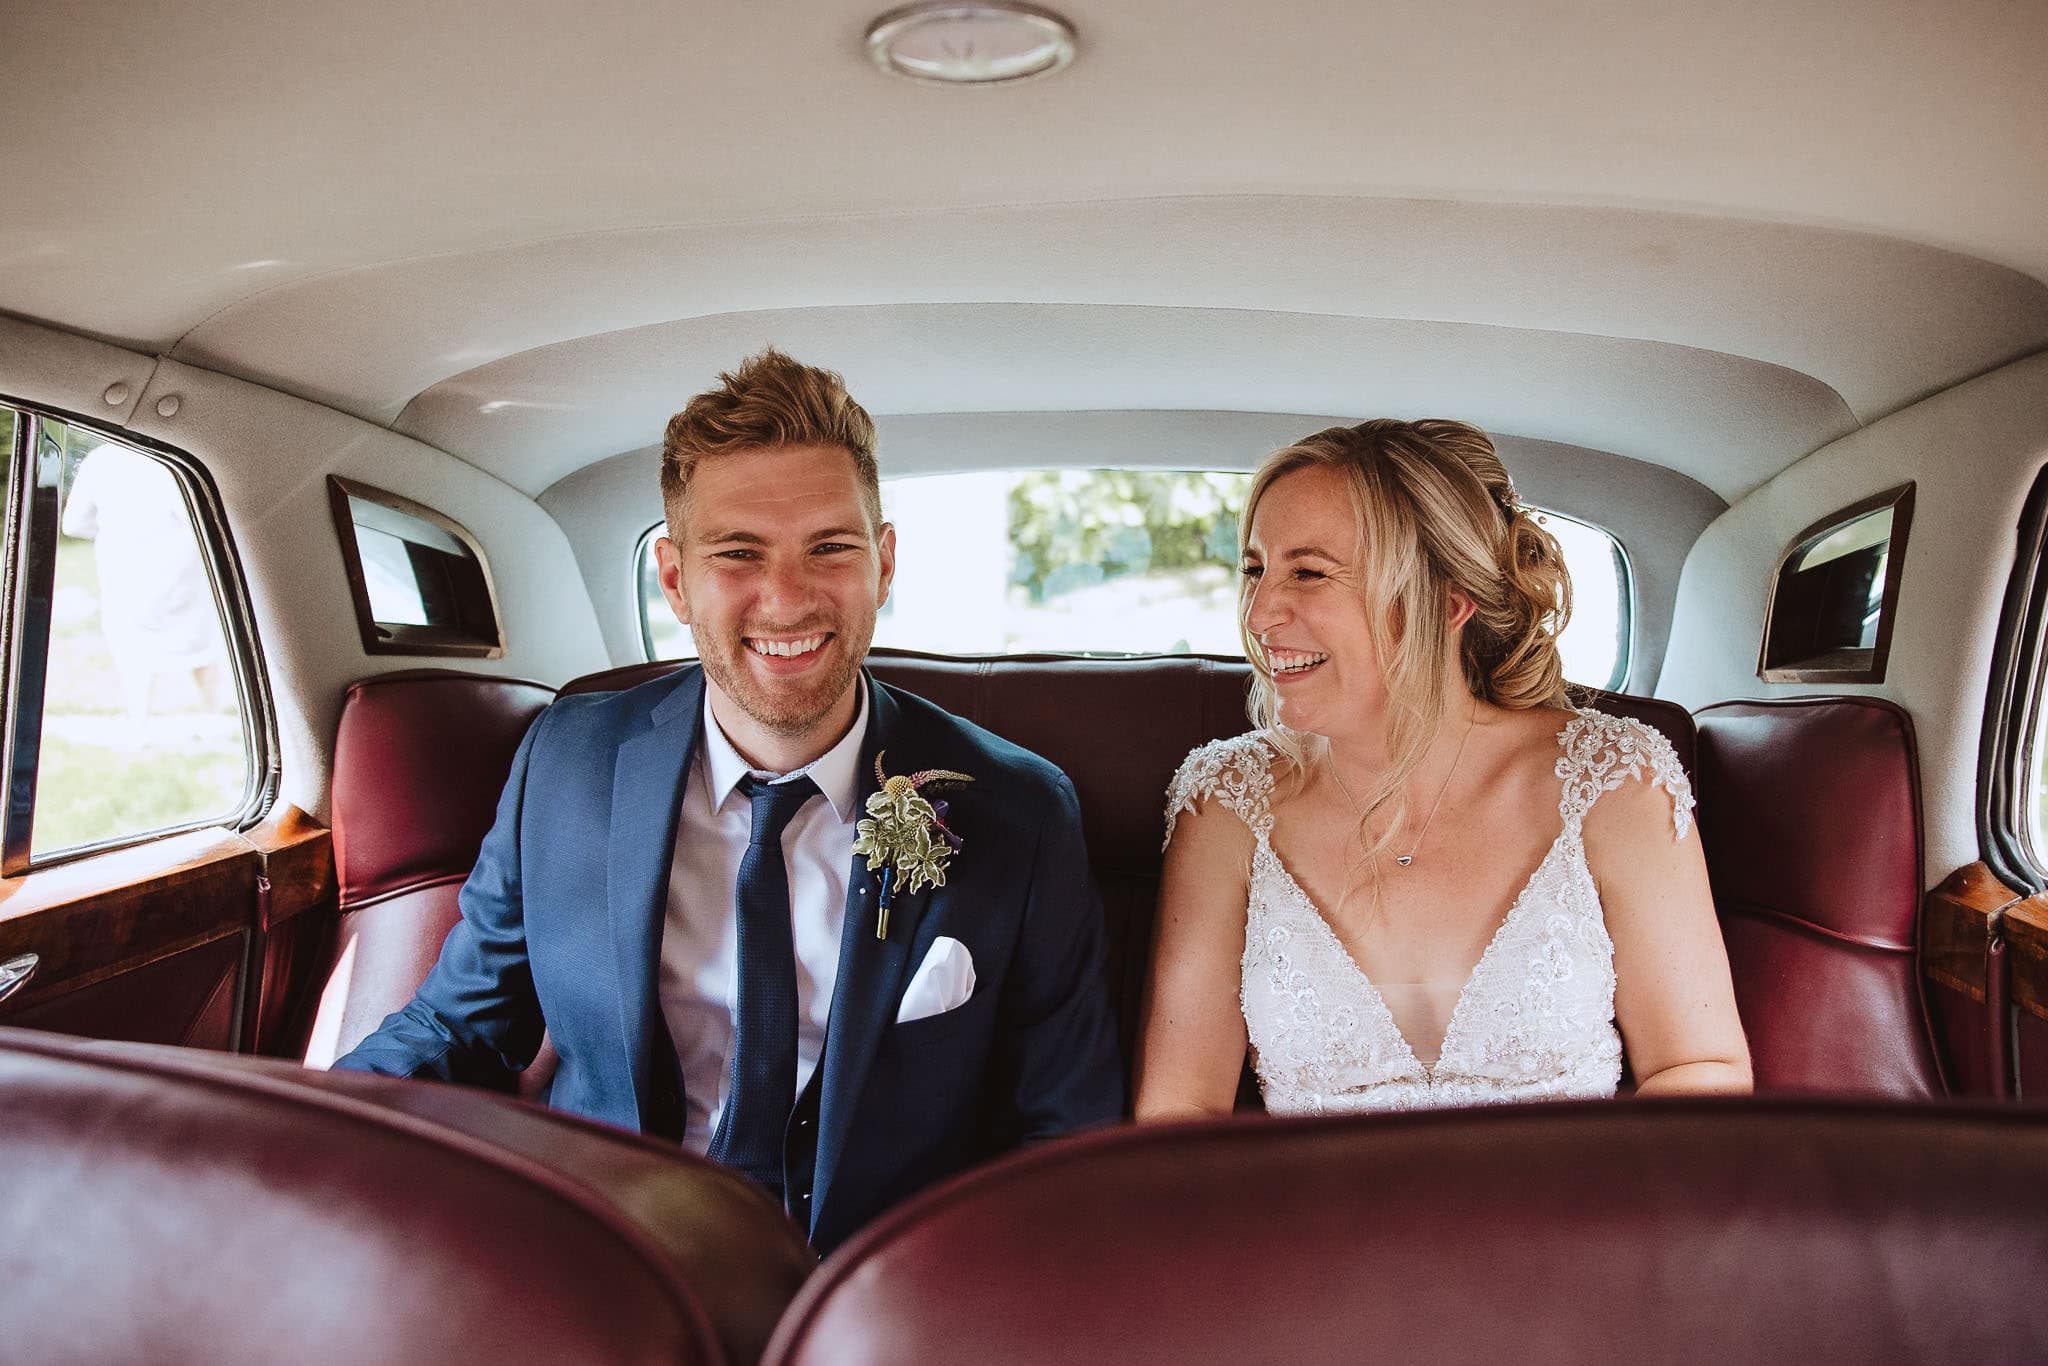 Red on Blonde photography shot of happy couple in vintage car